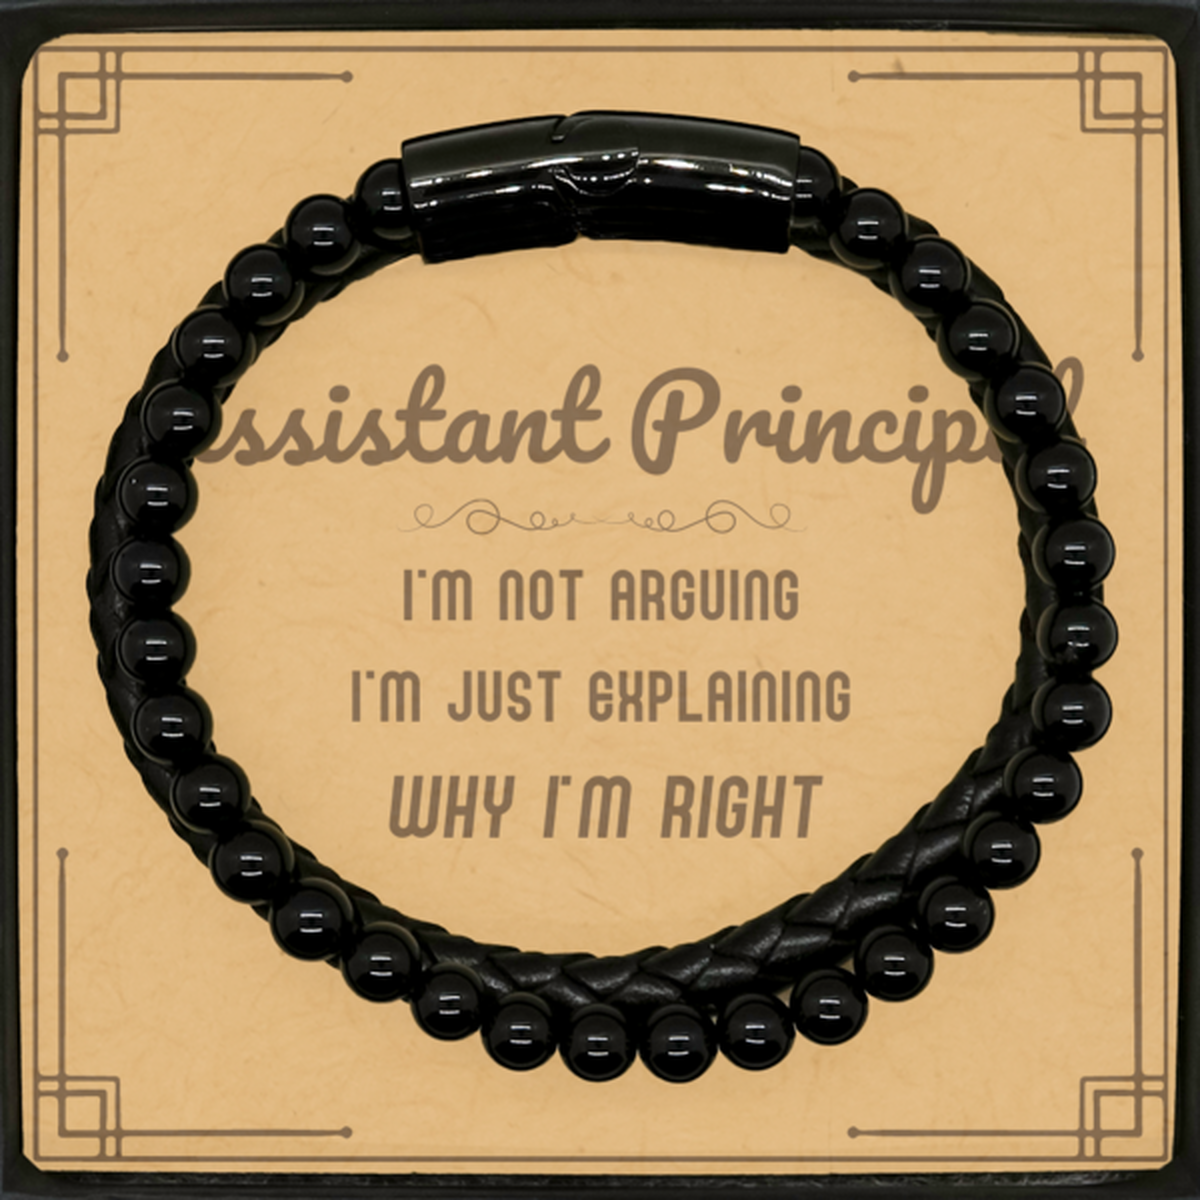 Assistant Principal I'm not Arguing. I'm Just Explaining Why I'm RIGHT Stone Leather Bracelets, Funny Saying Quote Assistant Principal Gifts For Assistant Principal Message Card Graduation Birthday Christmas Gifts for Men Women Coworker